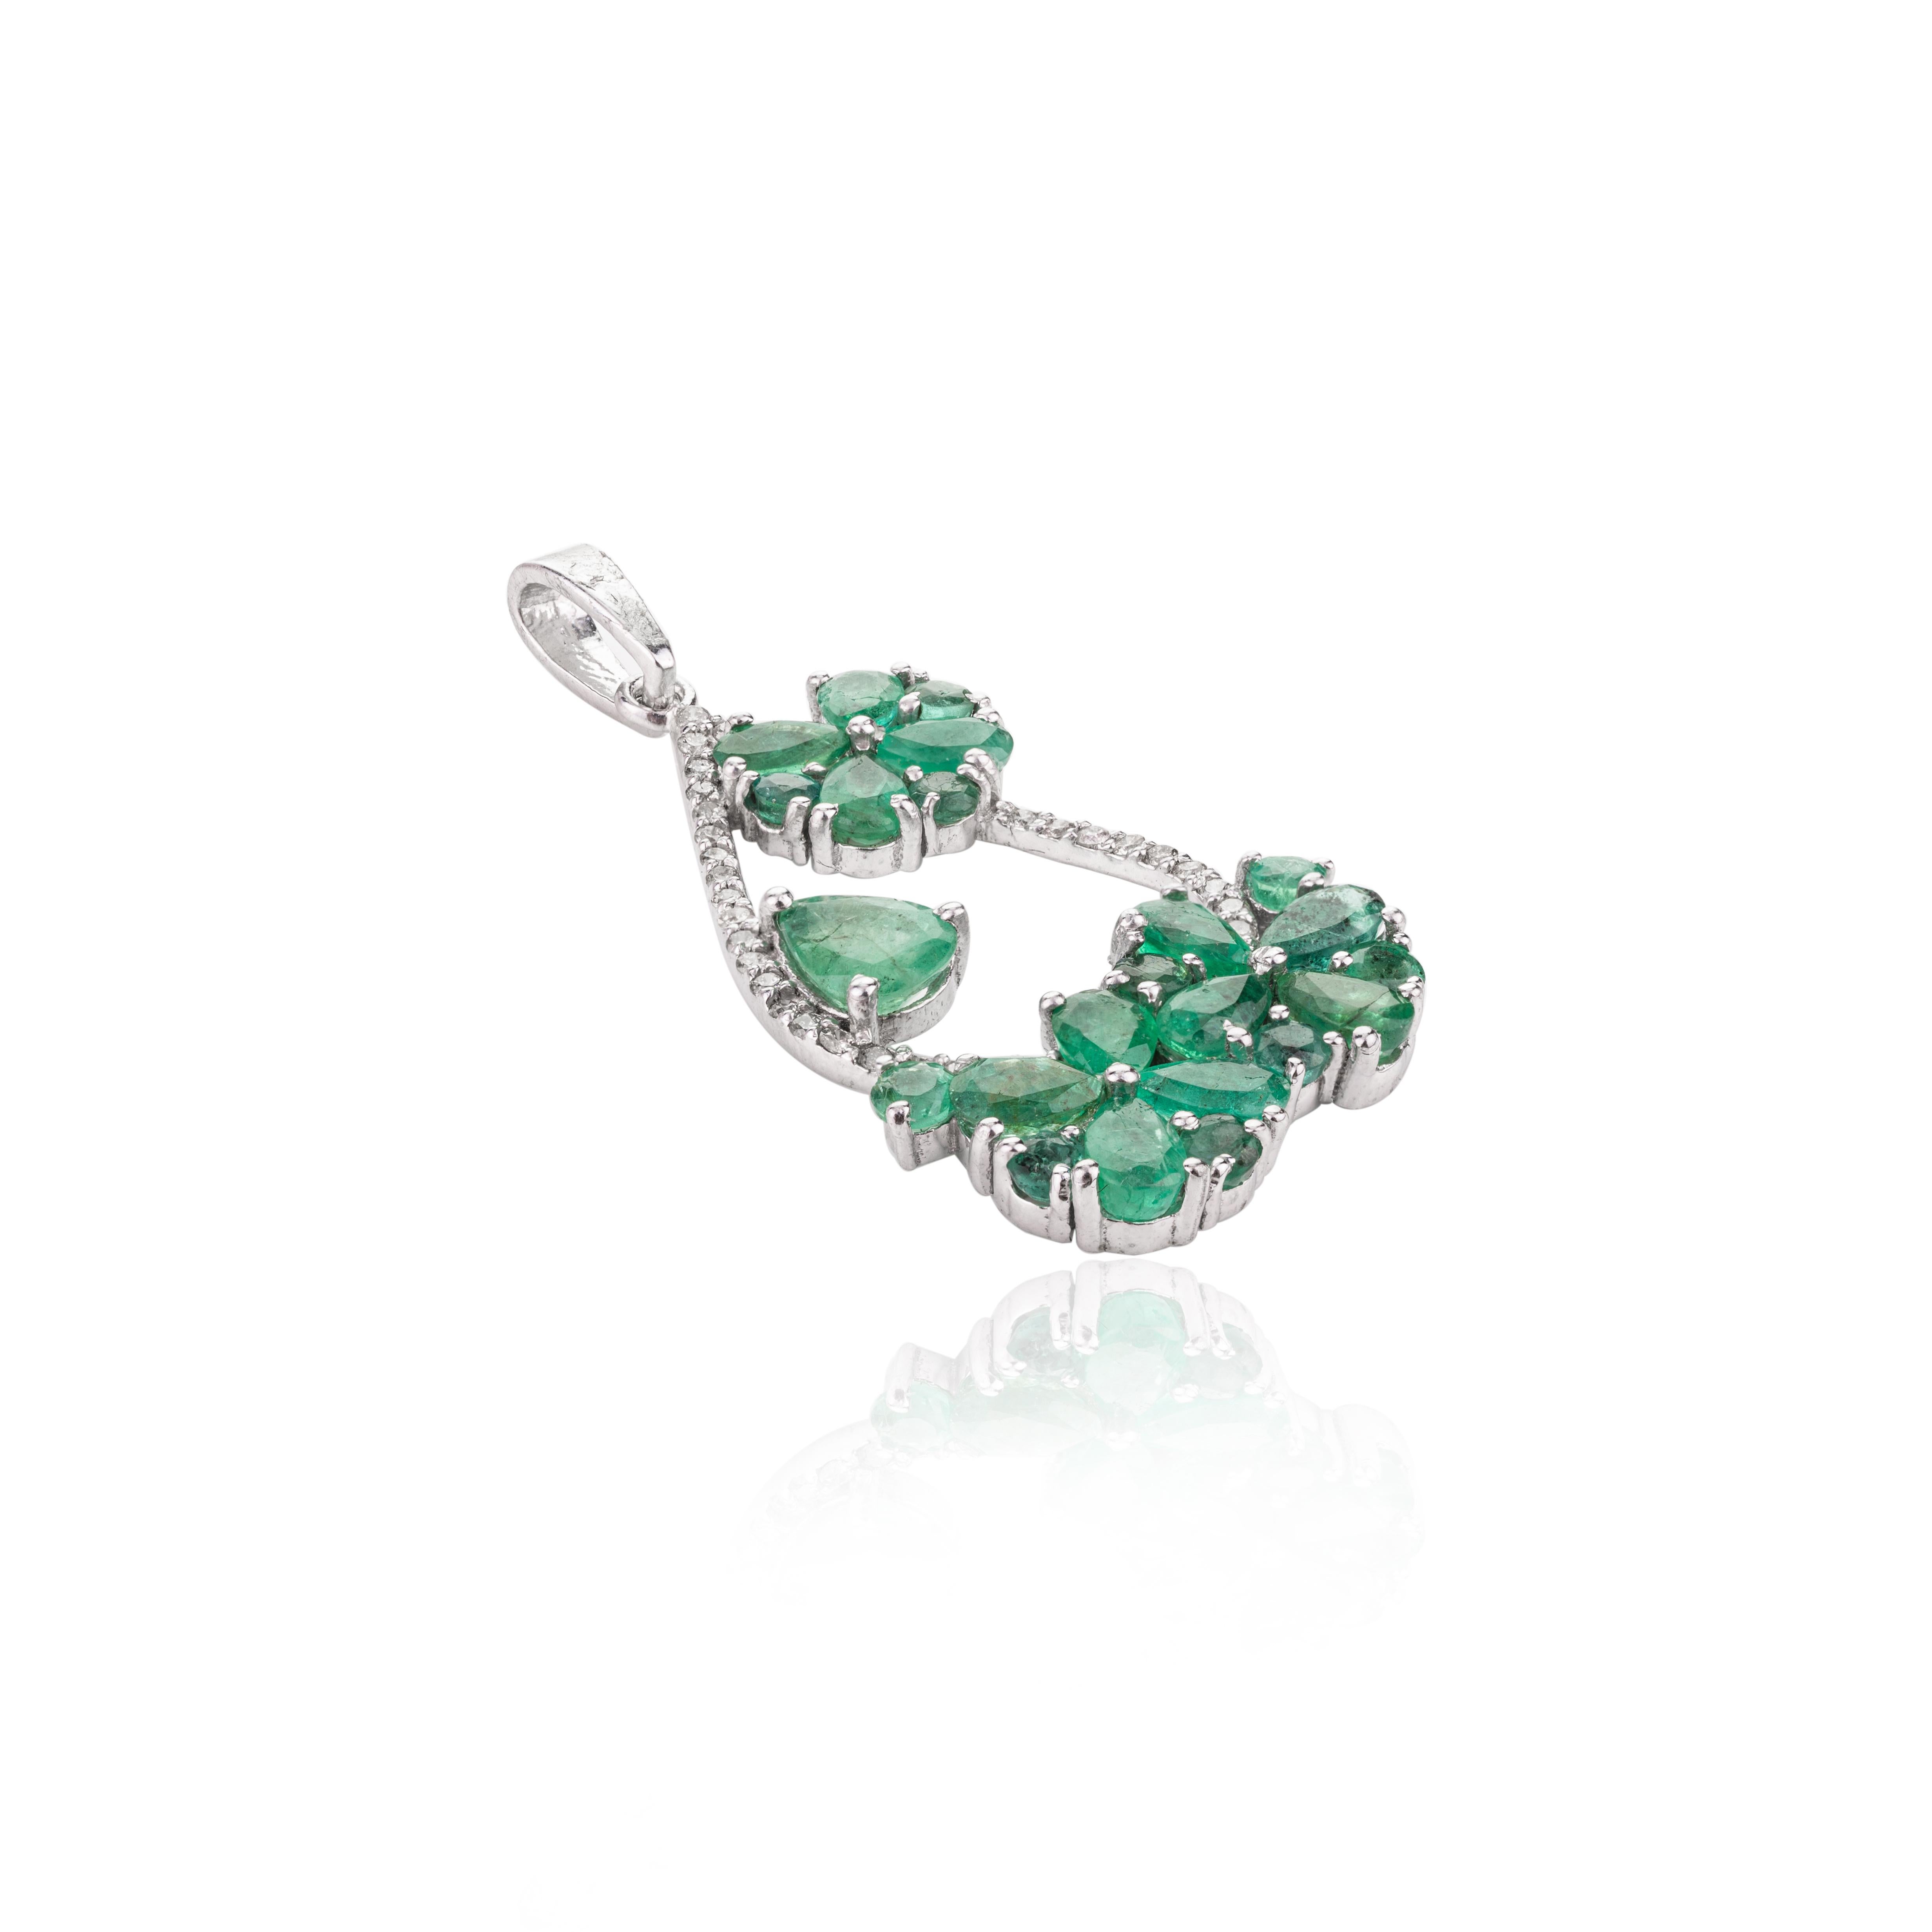 This Designer Emerald and Diamond Flower Wedding Pendant is meticulously crafted from the finest materials and adorned with stunning emerald which enhances communication skills and boosts mental clarity. 
This delicate to statement pendants, suits